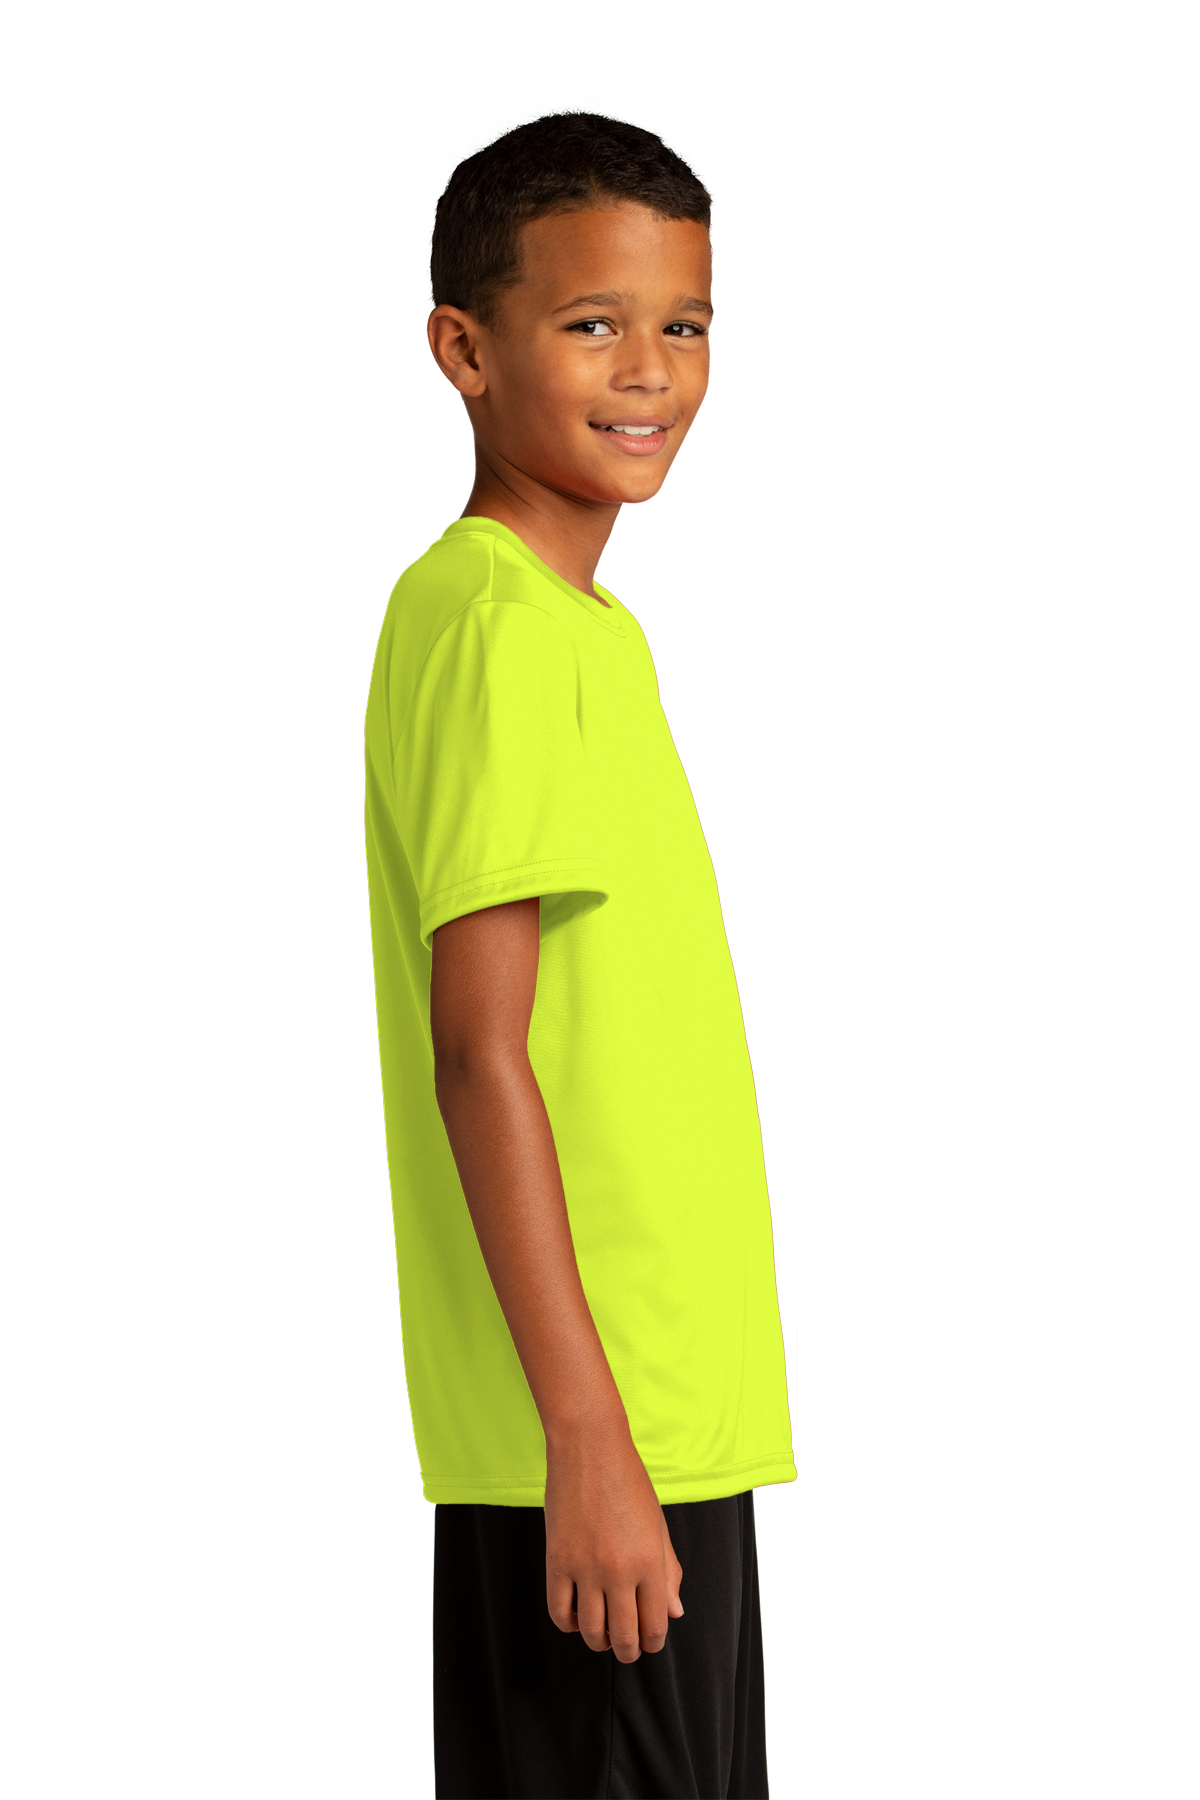 | Product SanMar PosiCharge Tee | Sport-Tek Re-Compete Youth